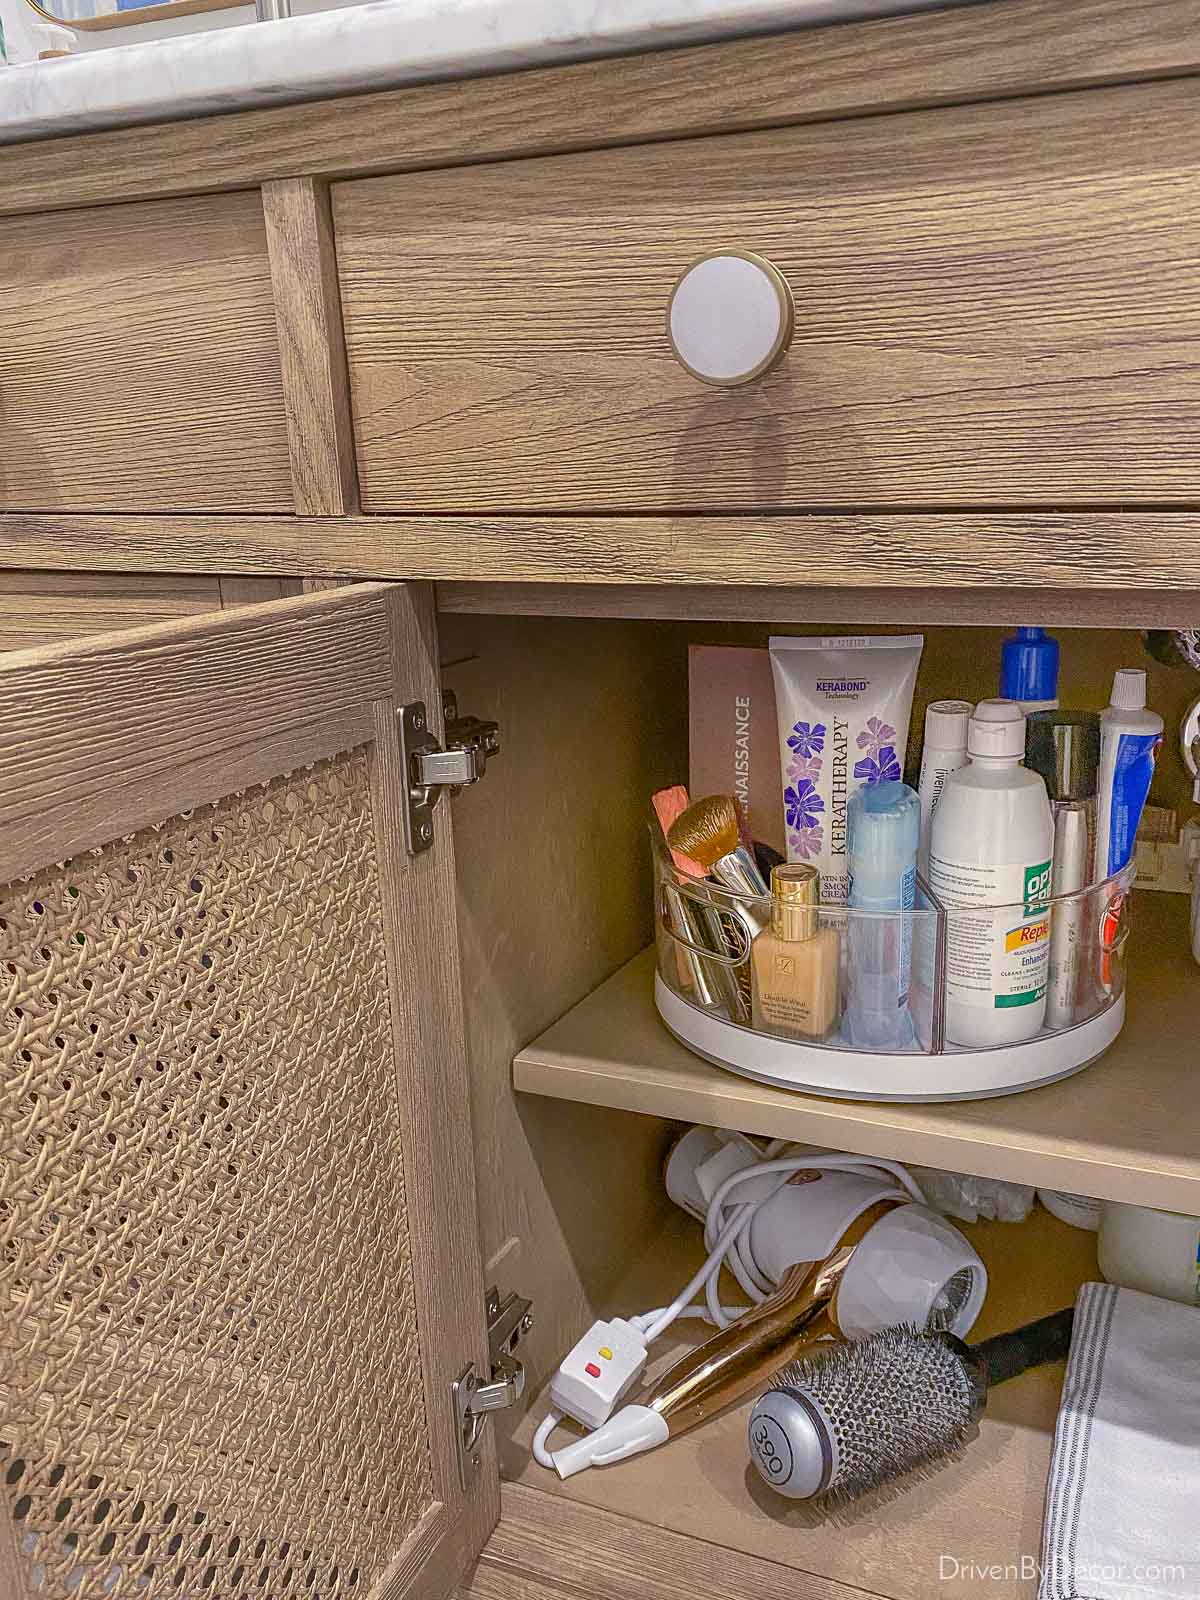 This divided turntable is perfect for storing bathroom toiletries under your bathroom cabinet